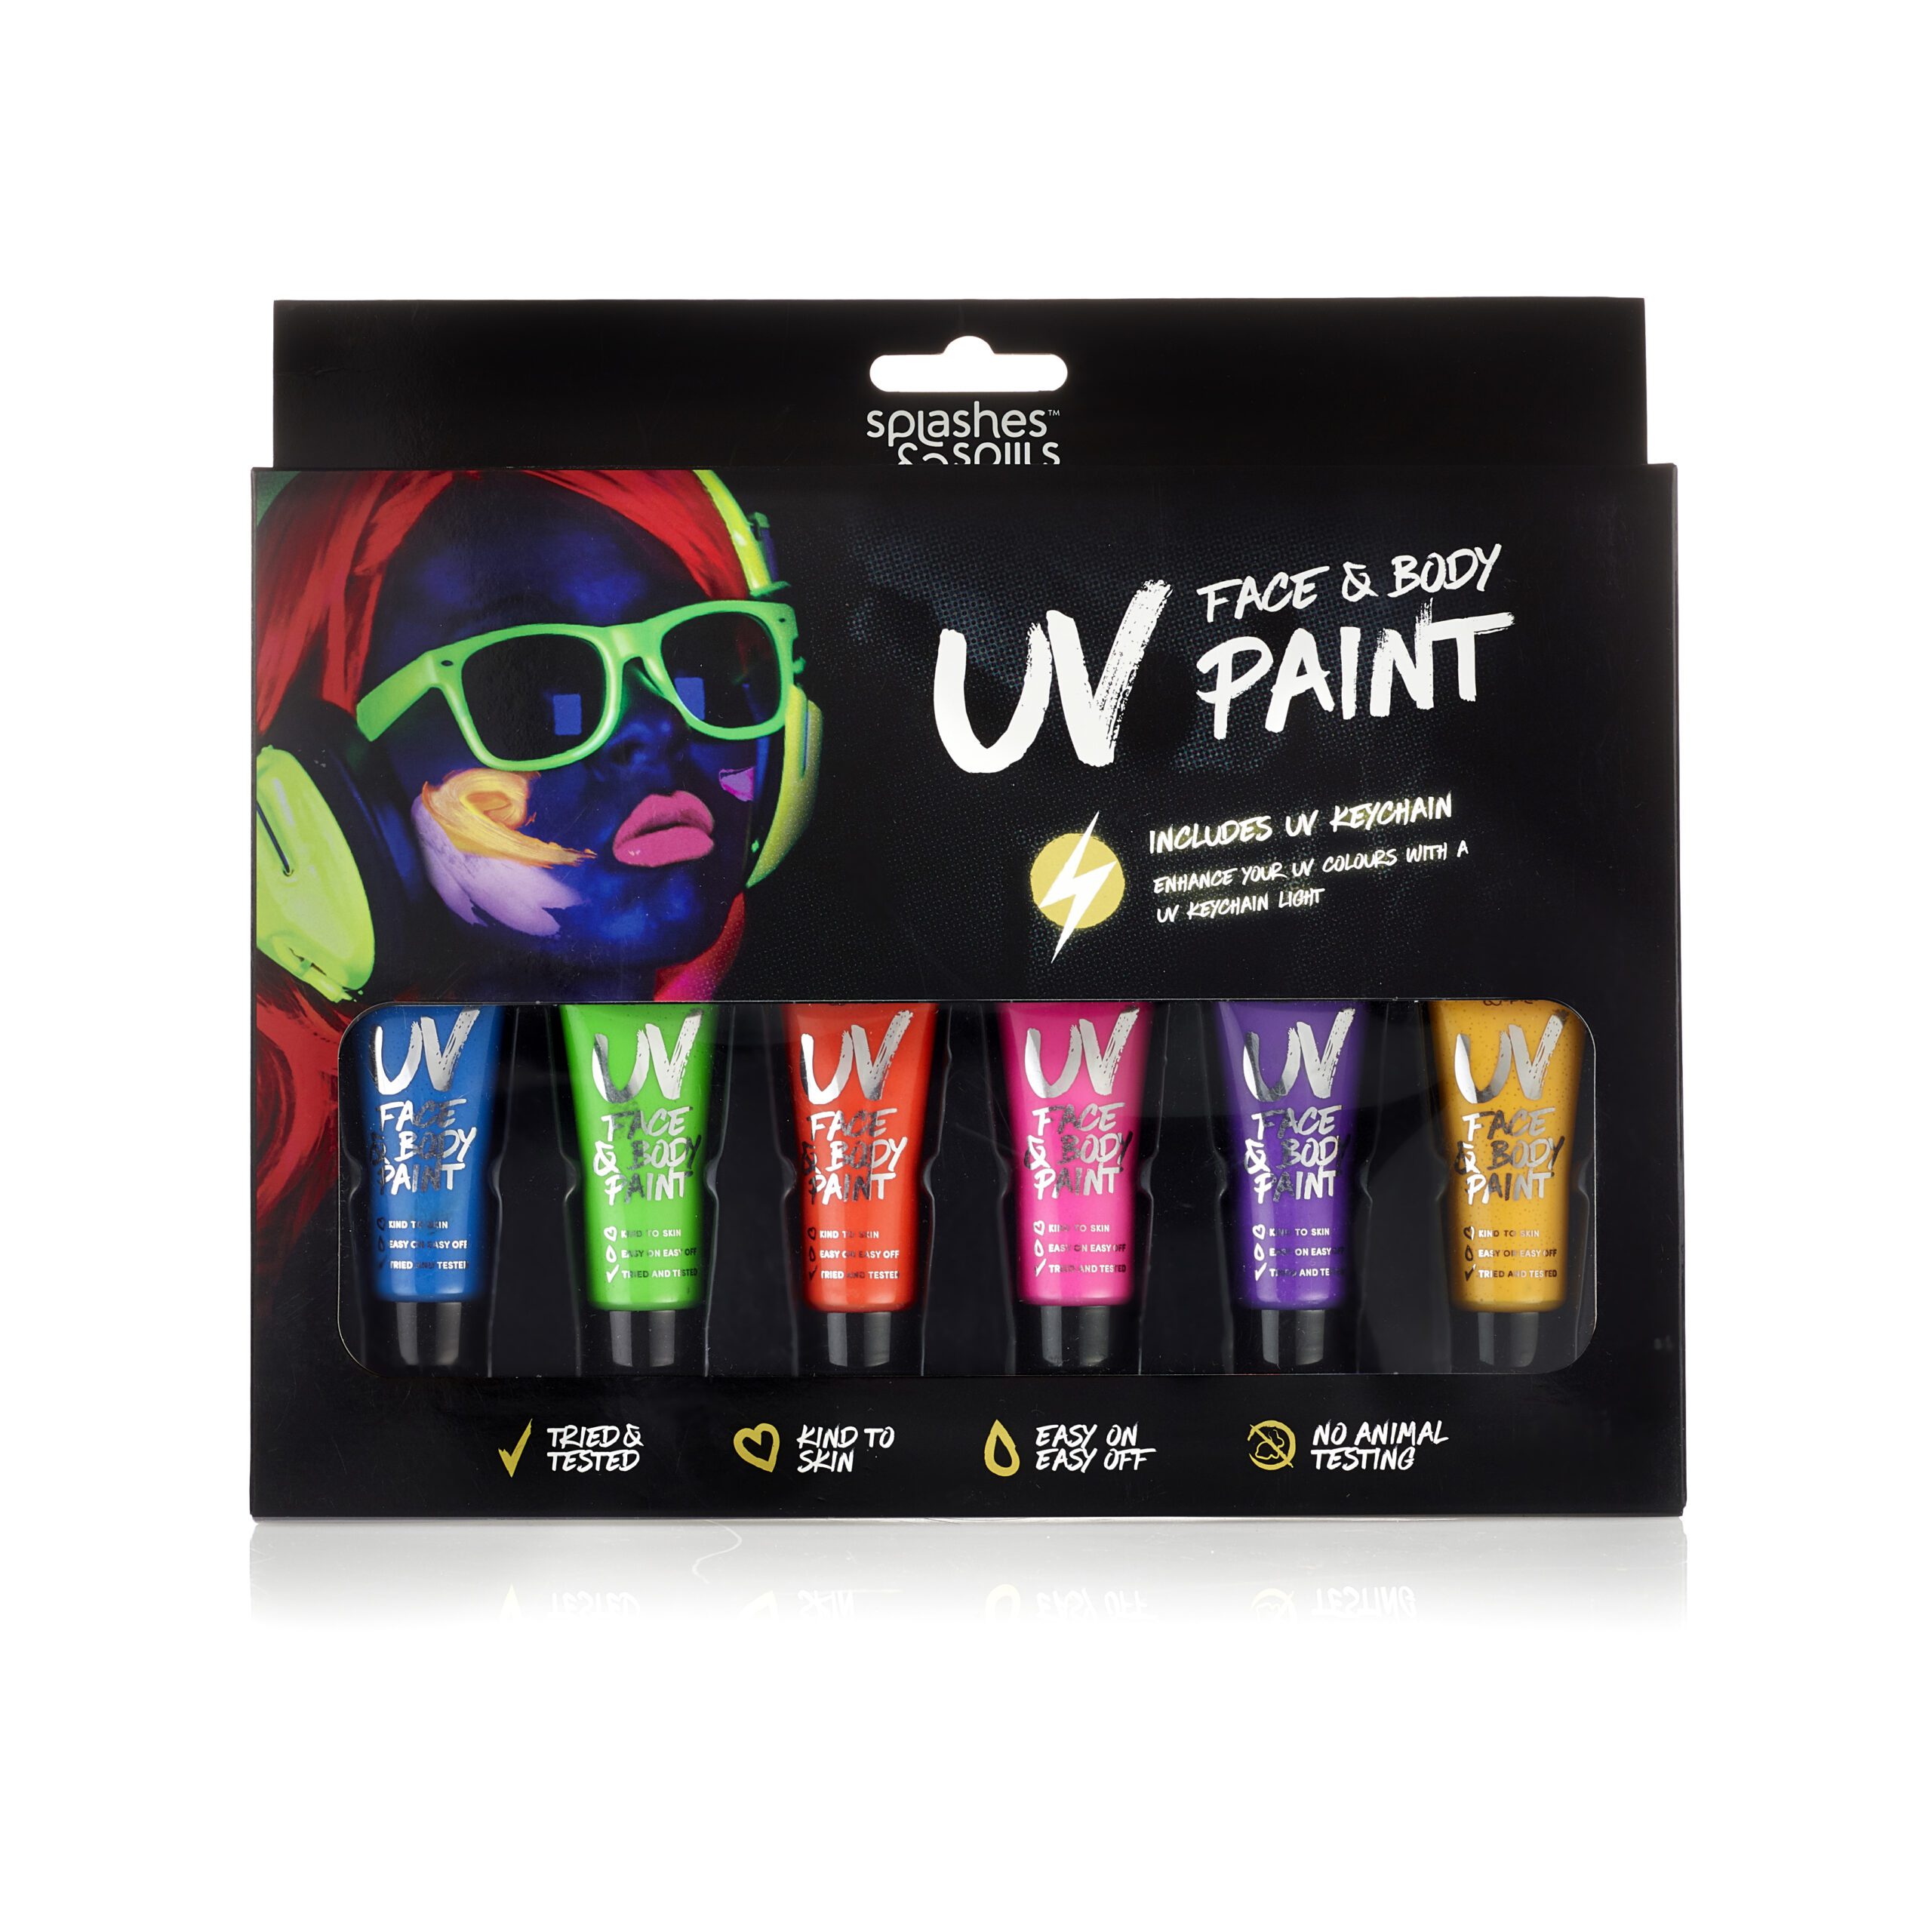 Glow in the Dark Face & Body Paint - Flash Fashion - UV Reactive!